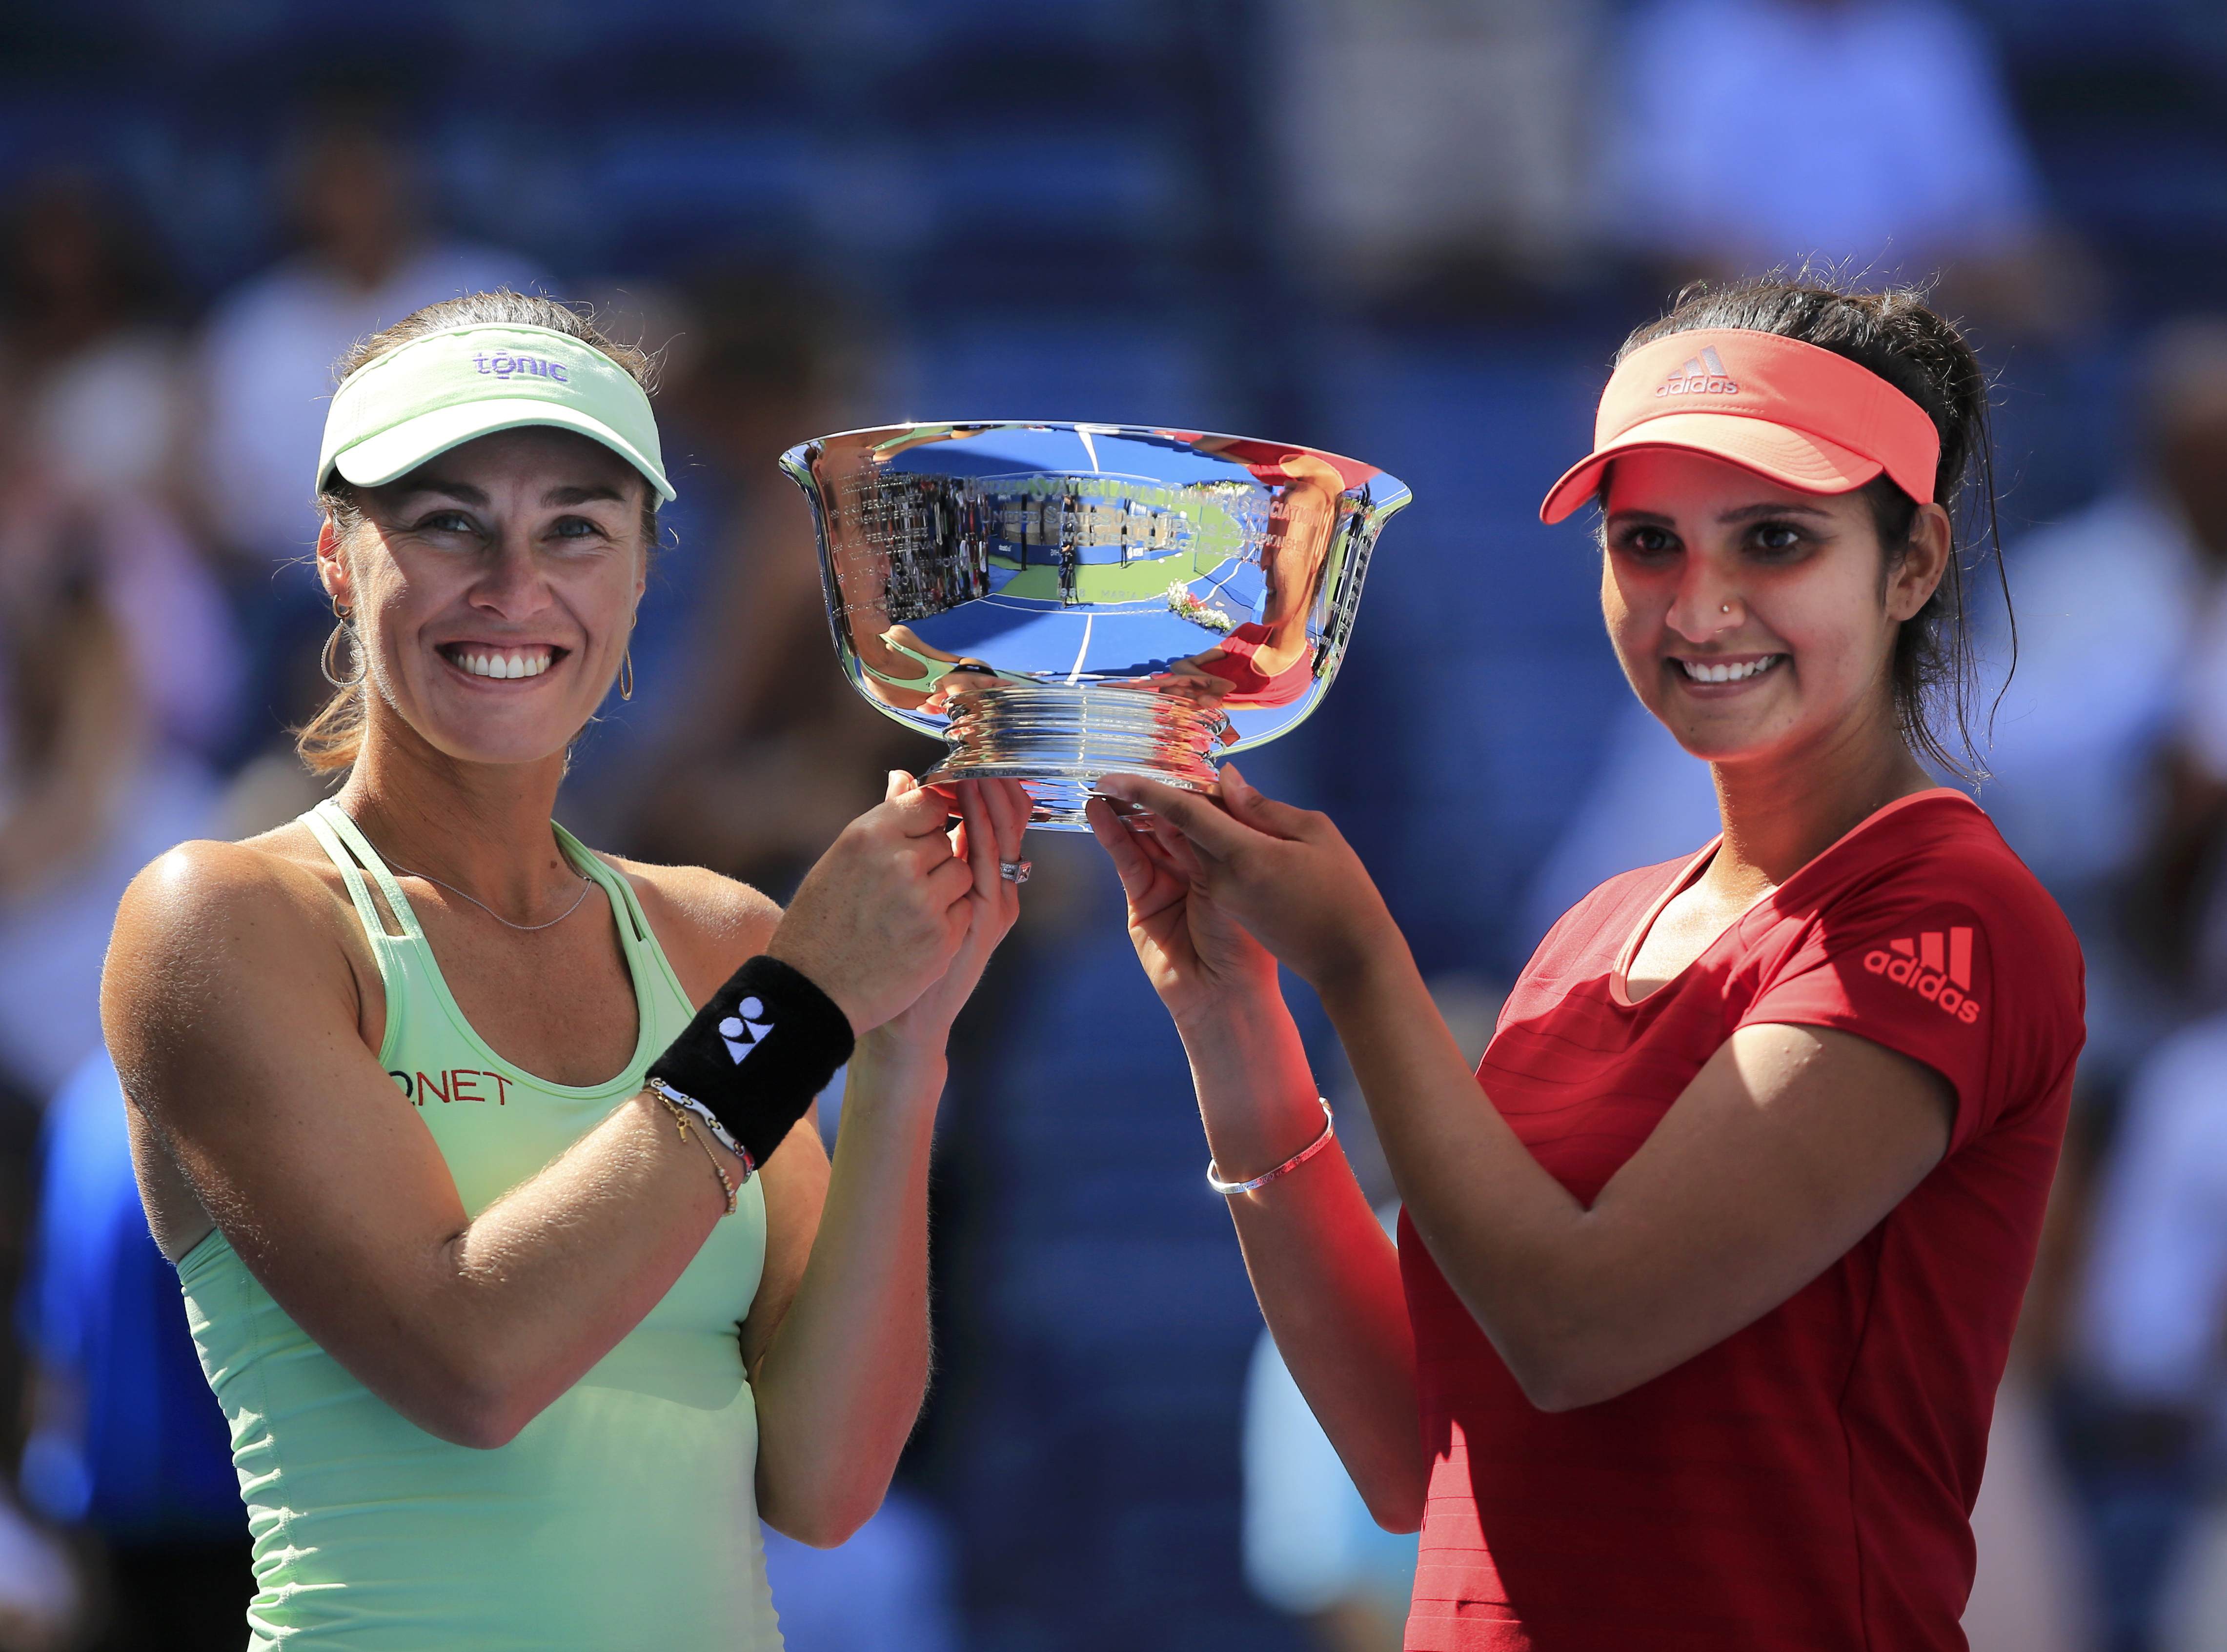 Martina Hingis of Switzerland (L) and Sania Mirza of India hold their trophy after defeating Casey Dellacqua of Australia and Yaroslava Shvedova of Kazakhstan in their women's doubles finals match at the U.S. Open Championships tennis tournament in New York, September 13, 2015.  REUTERS/Eduardo Munoz